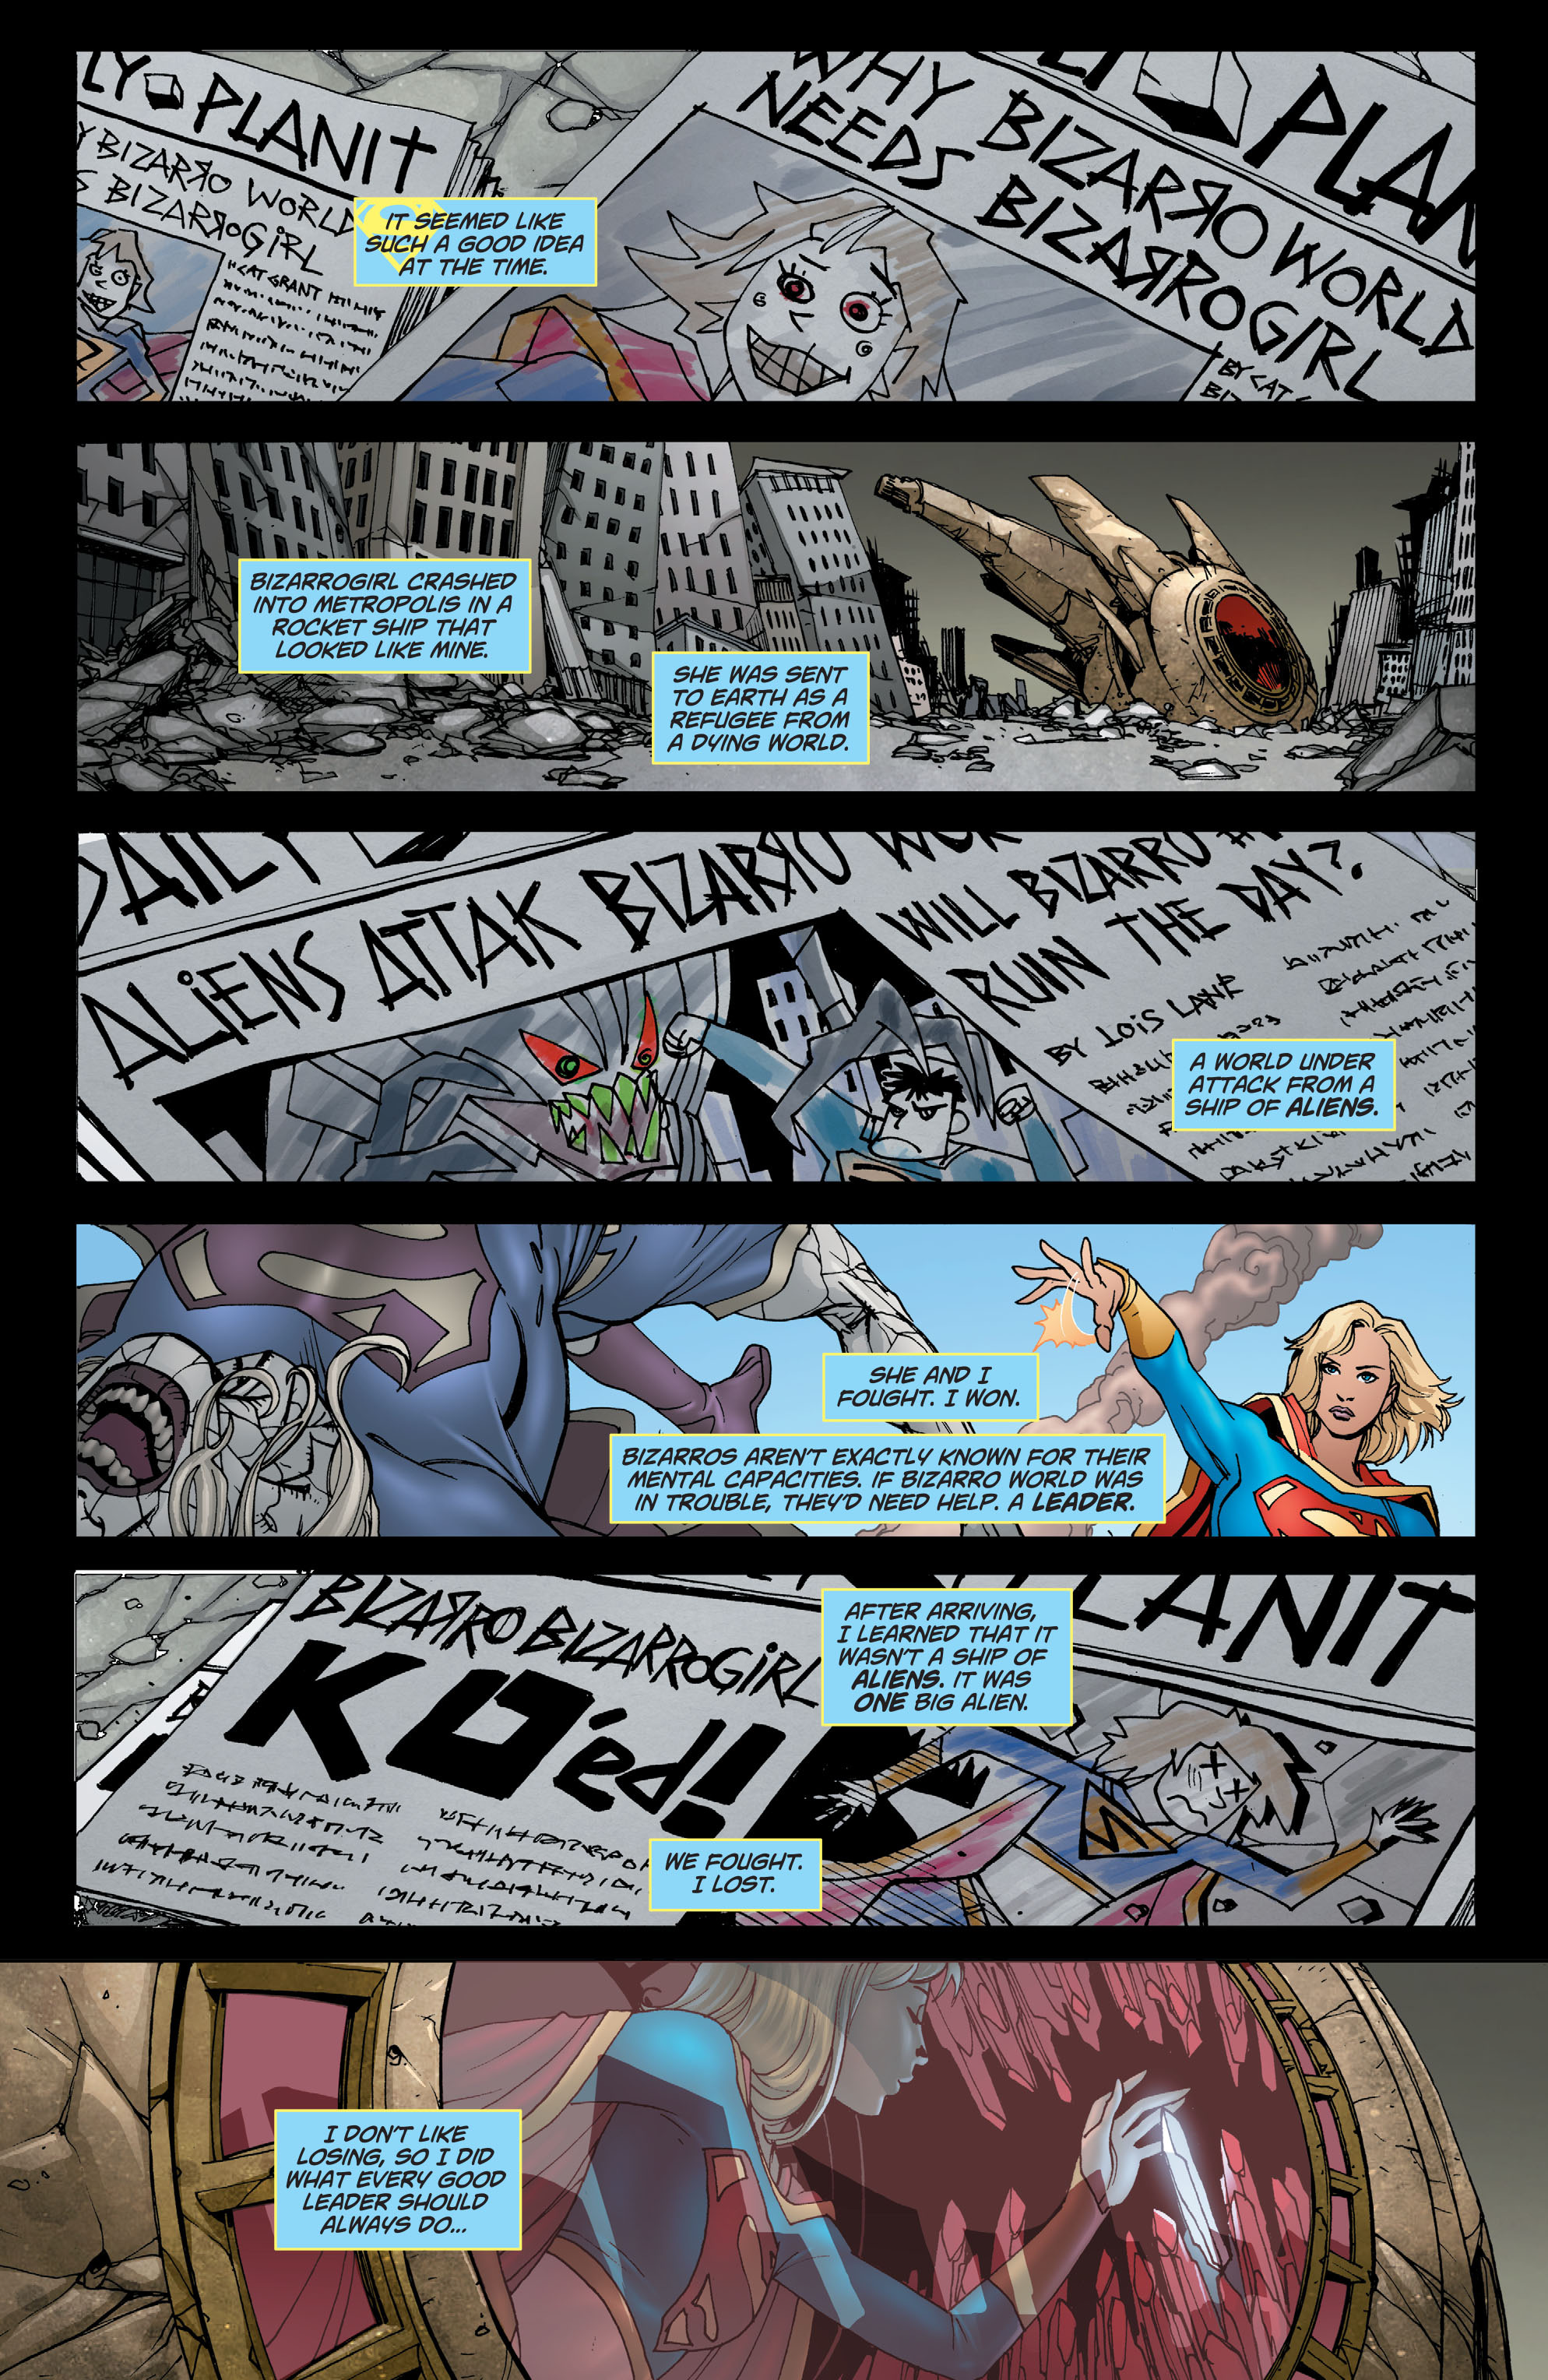 Supergirl (2005) 57 Page 1